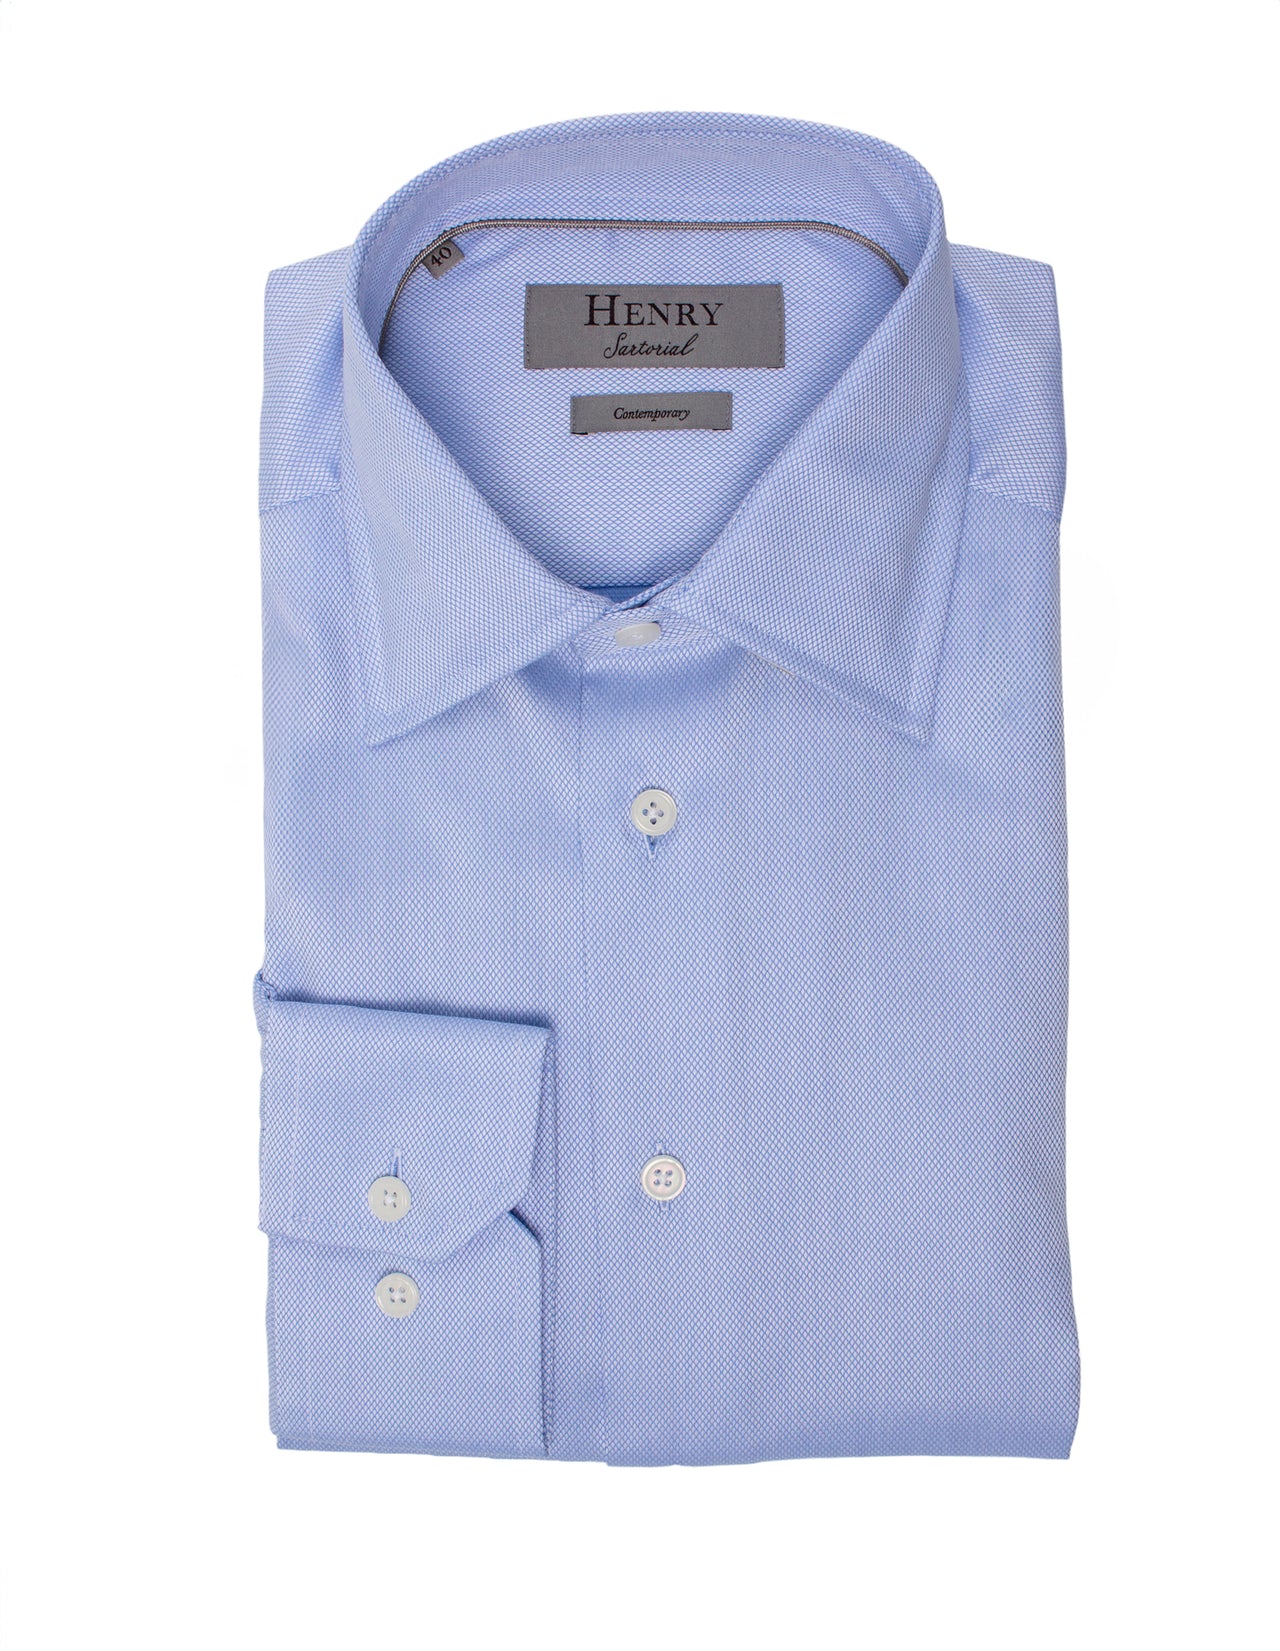 HENRY SARTORIAL Classic Fit Oxford Shirt BLUE